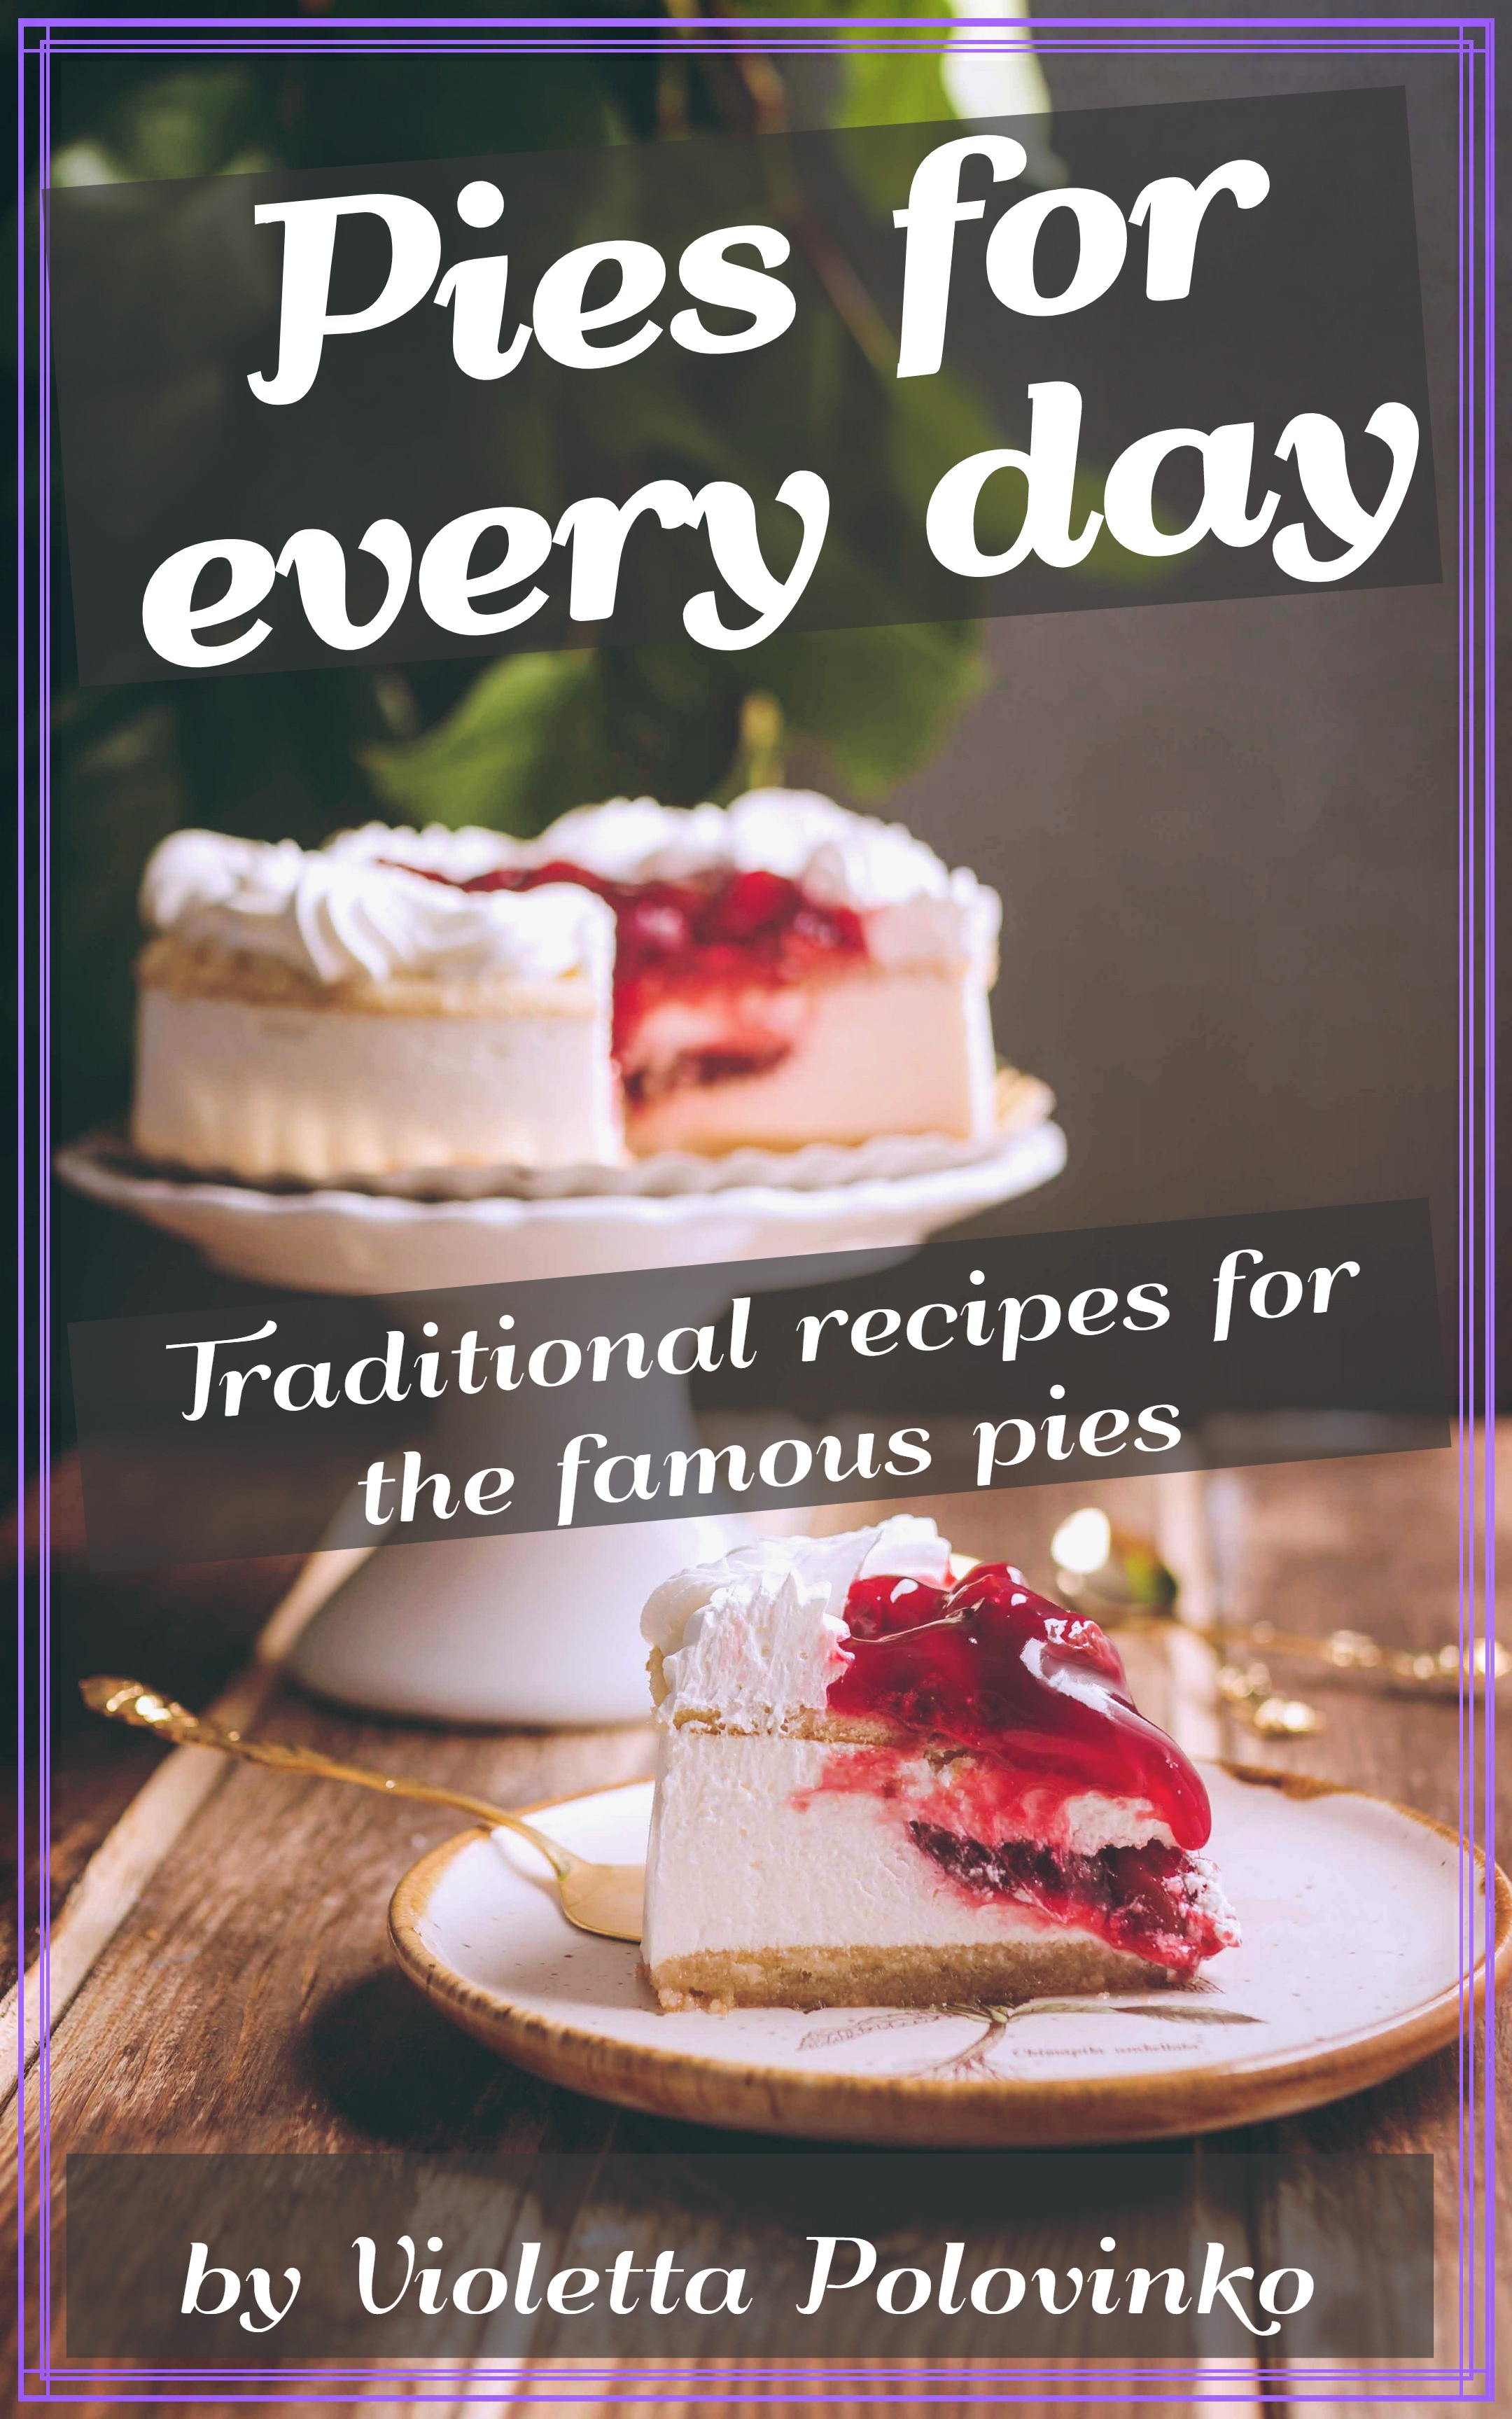 FREE: Pies for every day by Violetta Polovinko